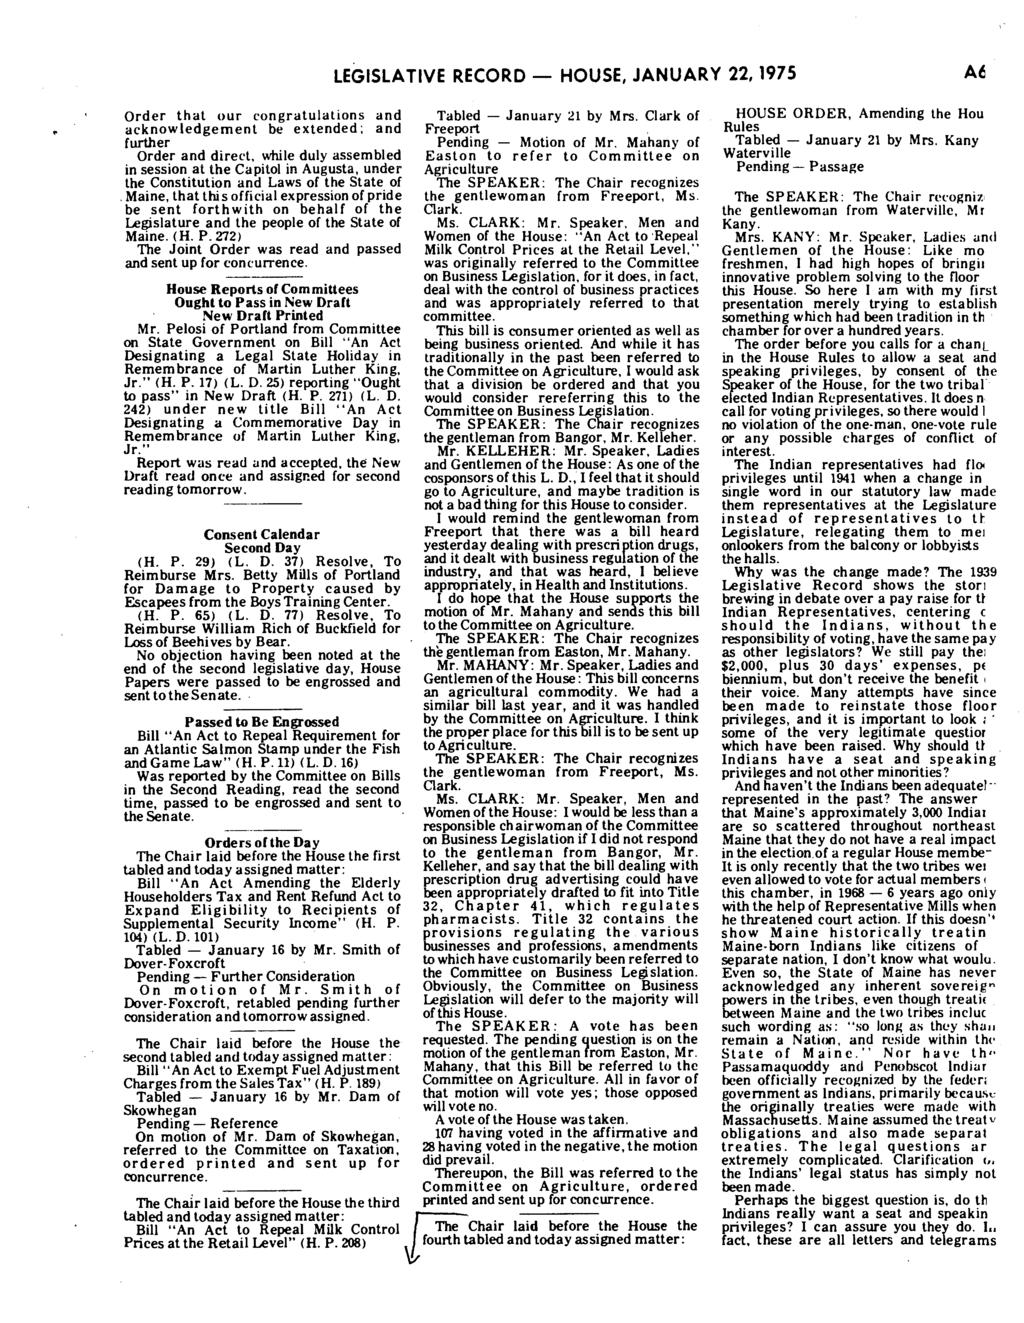 LEGISLATIVE RECORD- HOUSE, JANUARY 22, 1975 Order that our congratulations and Tabled - January 21 by Mrs. Clark of acknowledgement be extended; and Freeport. further Pending - Motion of Mr.